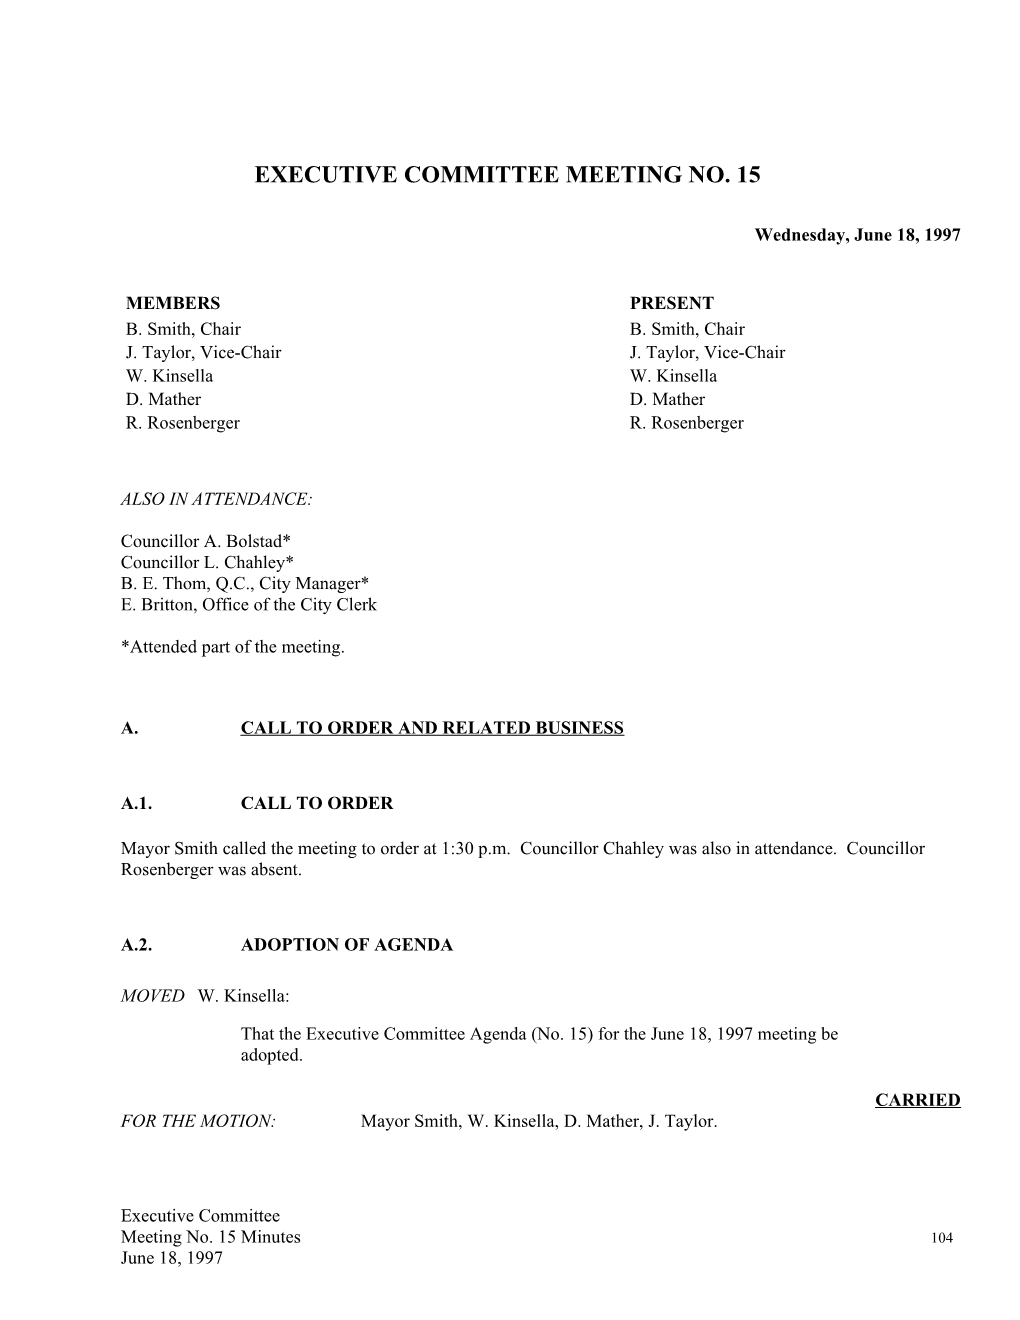 Executive Committee Meeting No. 15